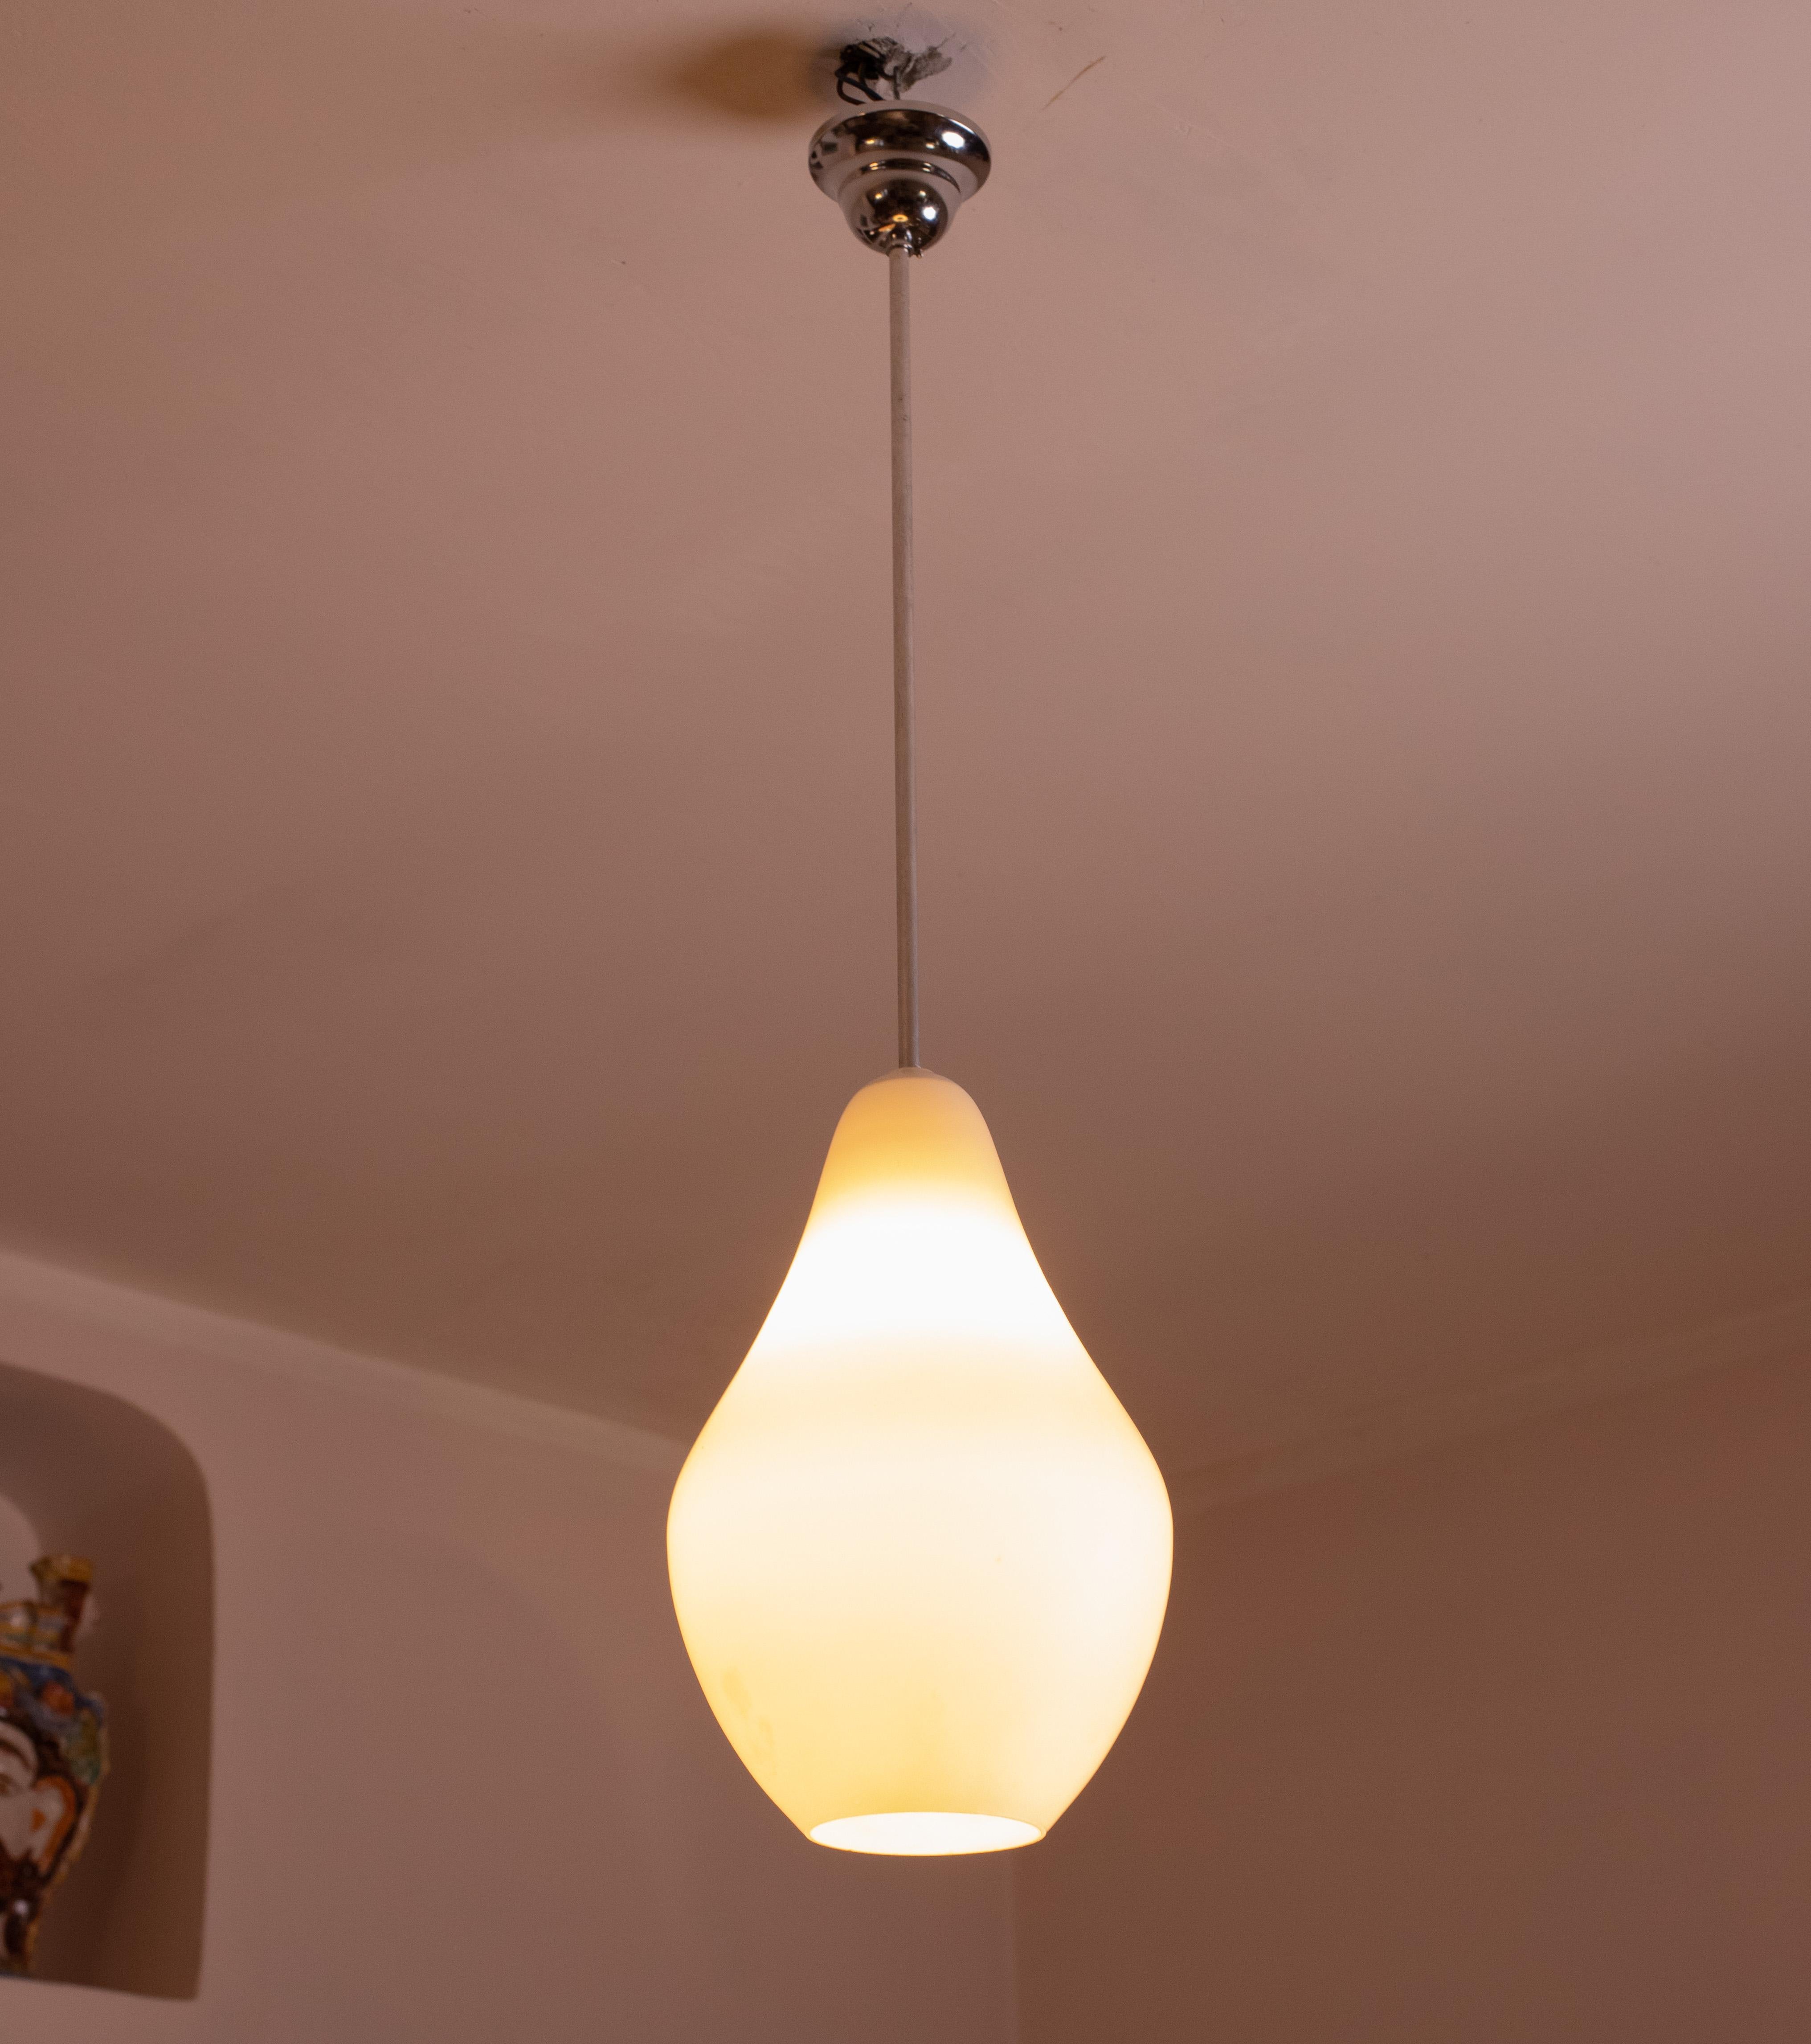 Stilnovo design opal glass pendant made in the 1970s.
 It connects to the ceiling with a brass element; the wire cover rosette has been replaced.
The pear-shaped cap is made of white opaline glass, attached to the structure by an aluminum element.